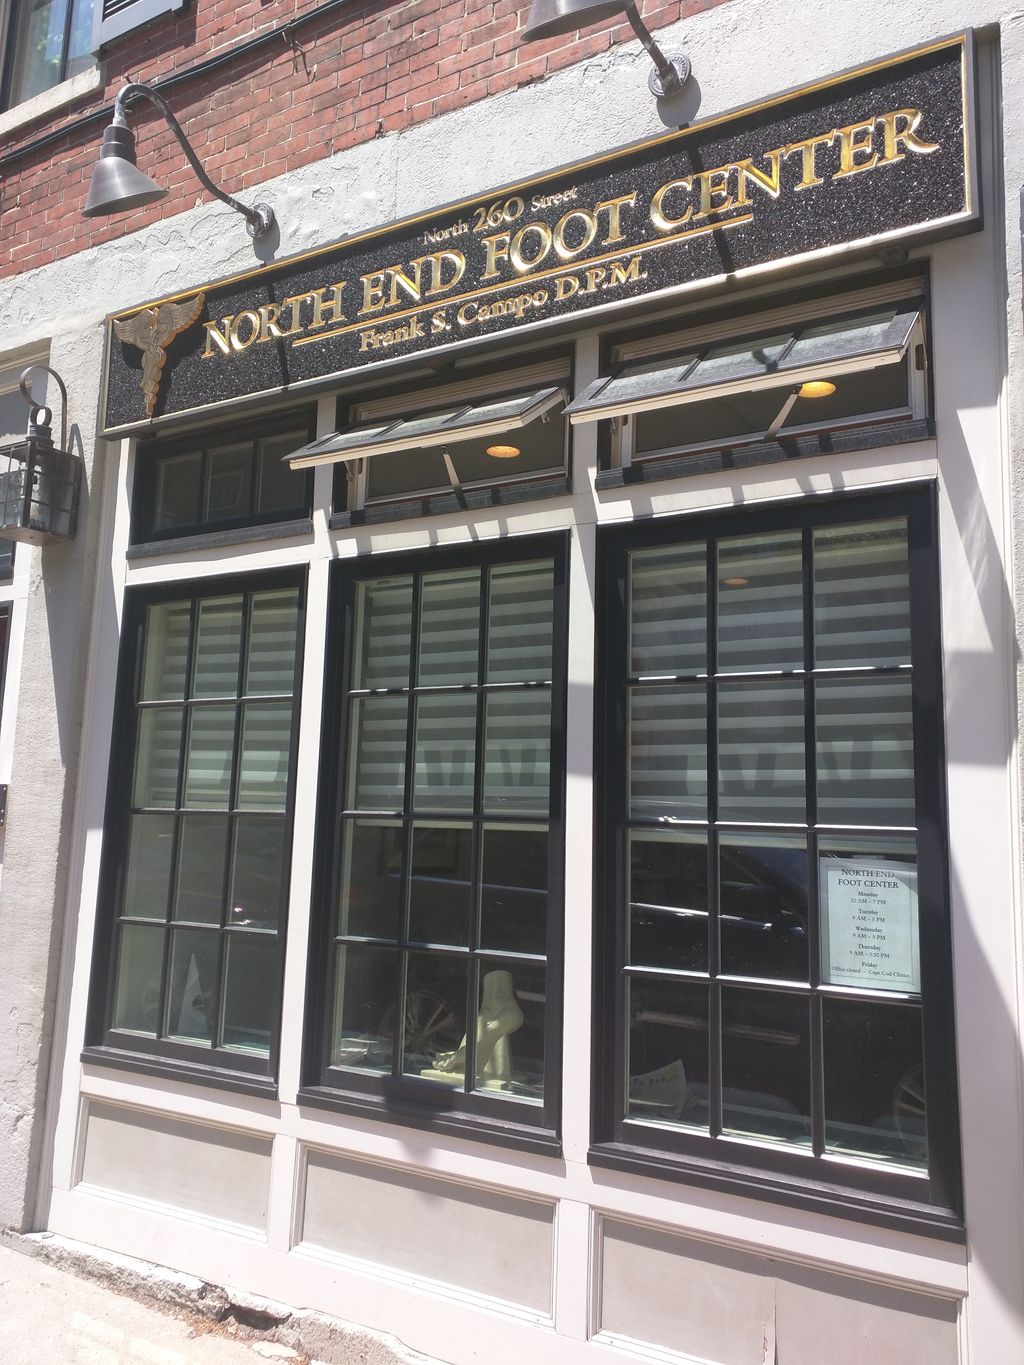 North-End-Foot-Center-1